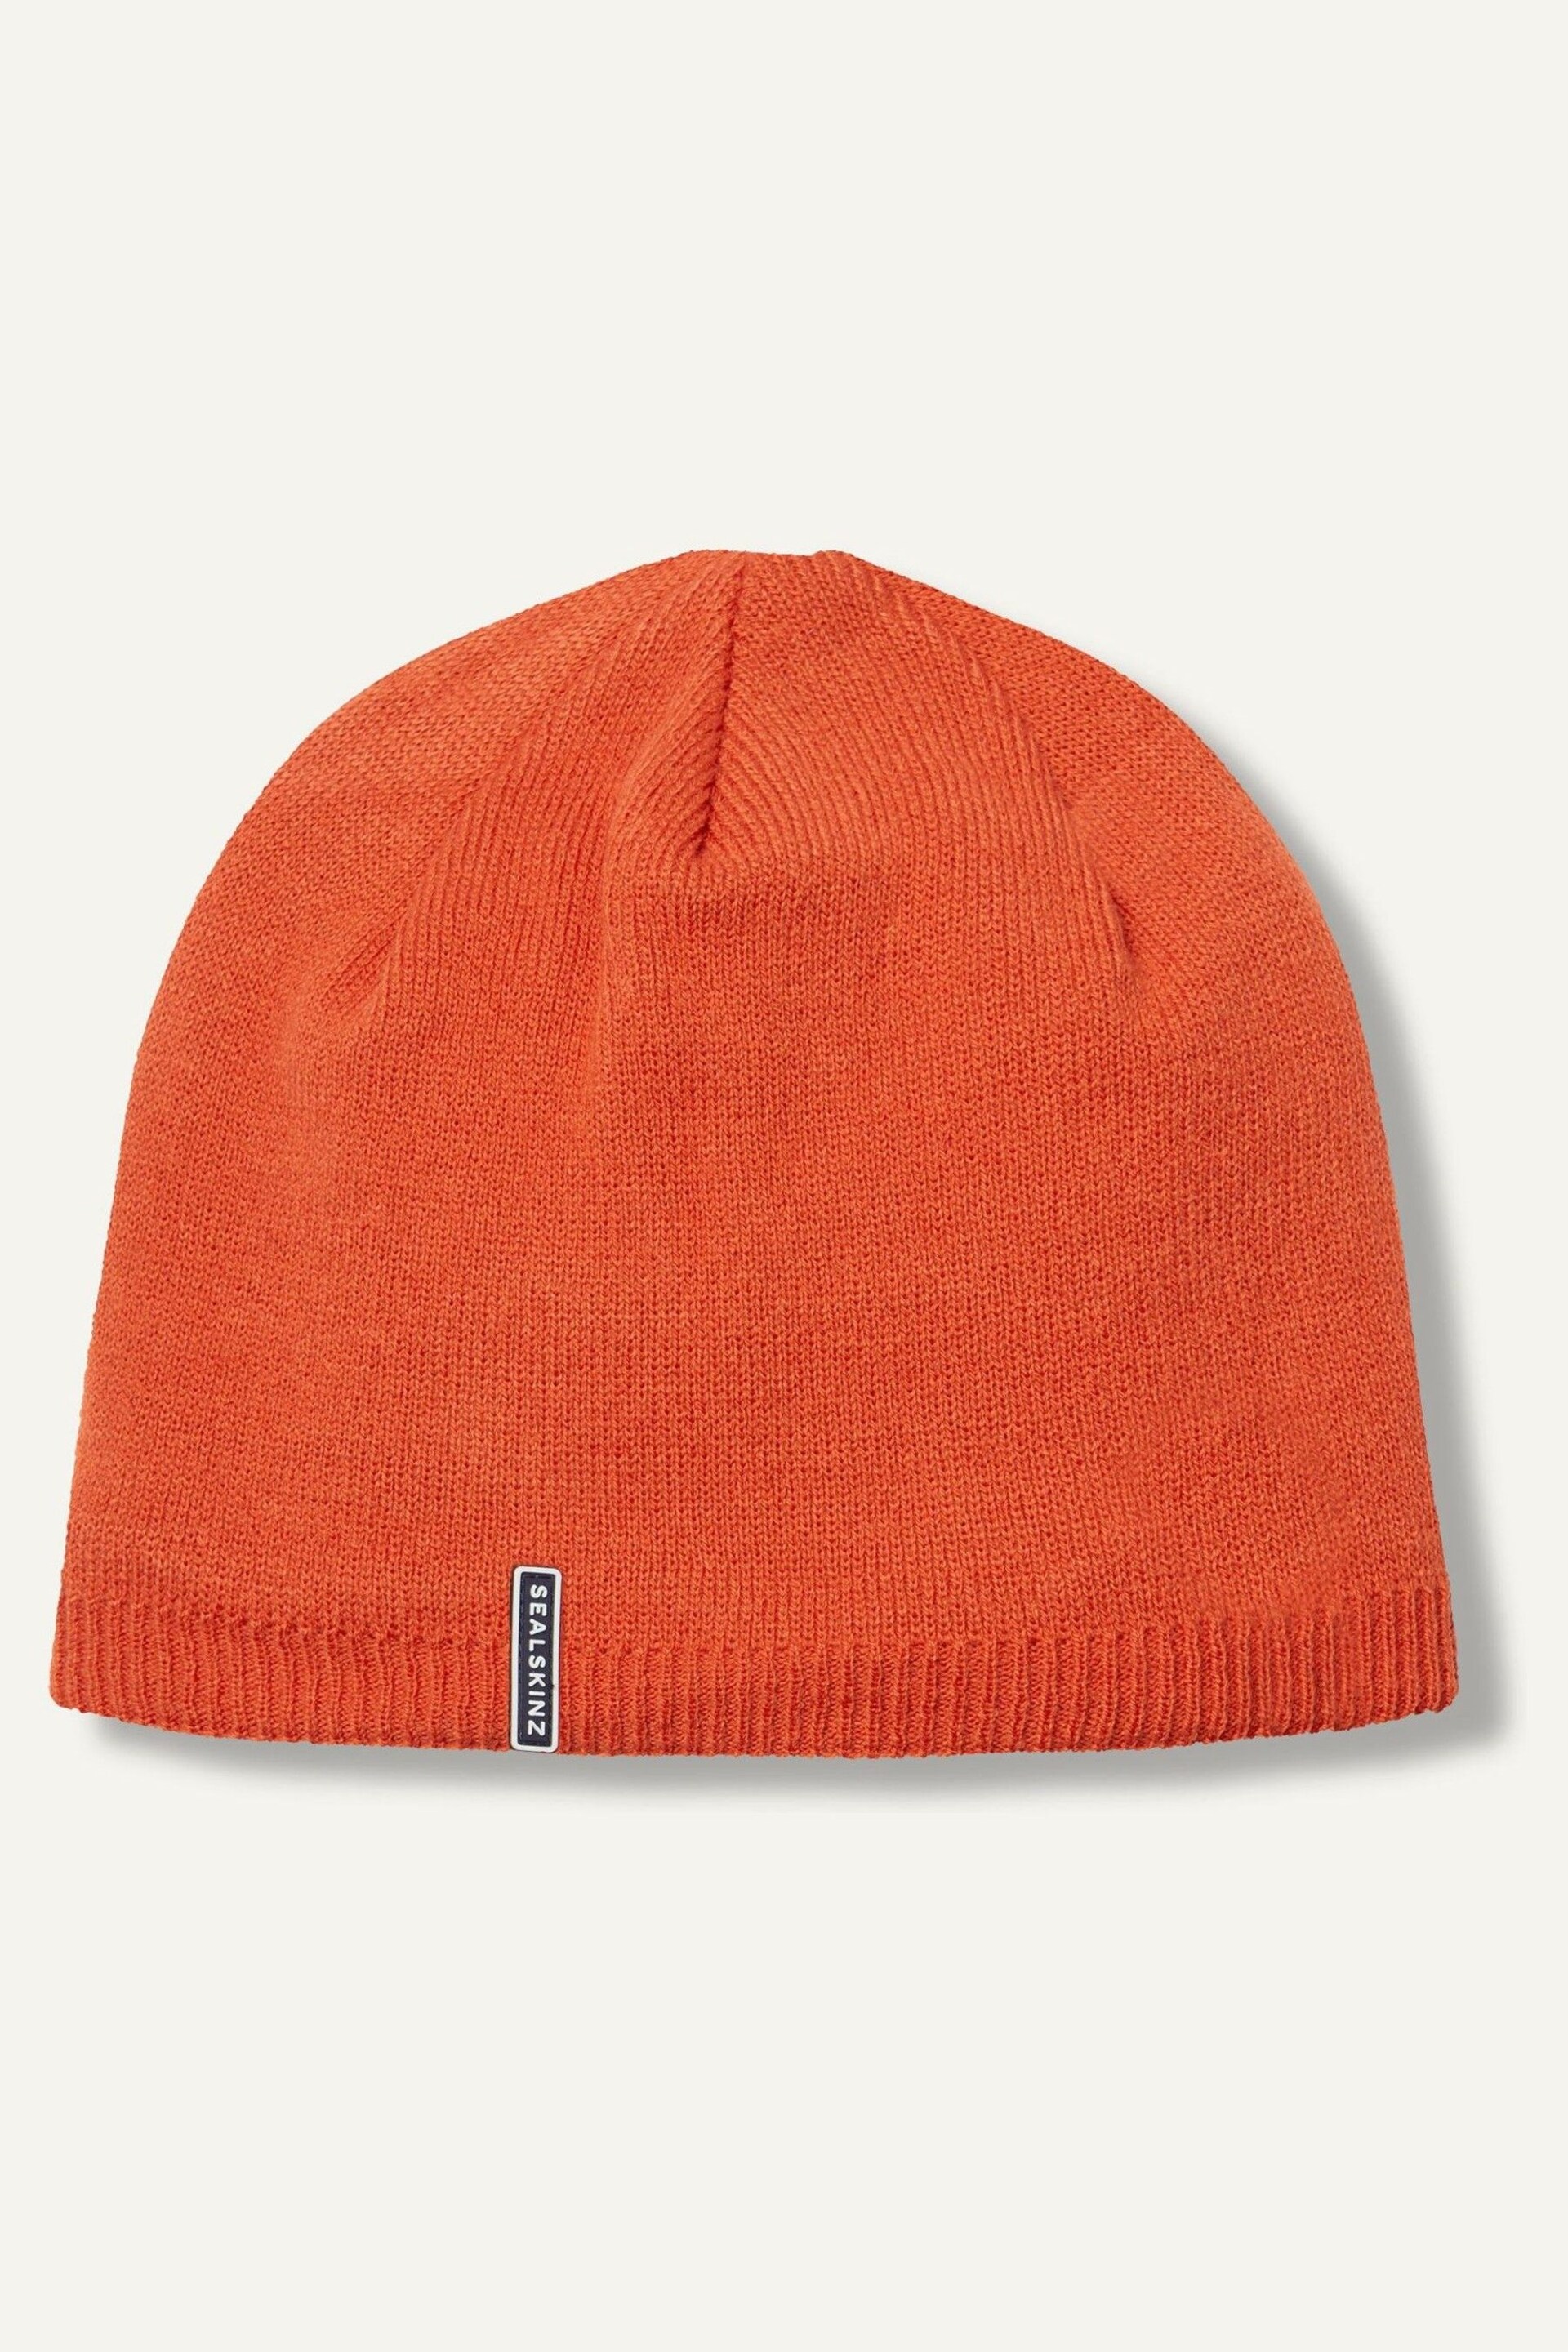 Sealskinz Cley Waterproof Cold Weather Beanie - Image 1 of 2